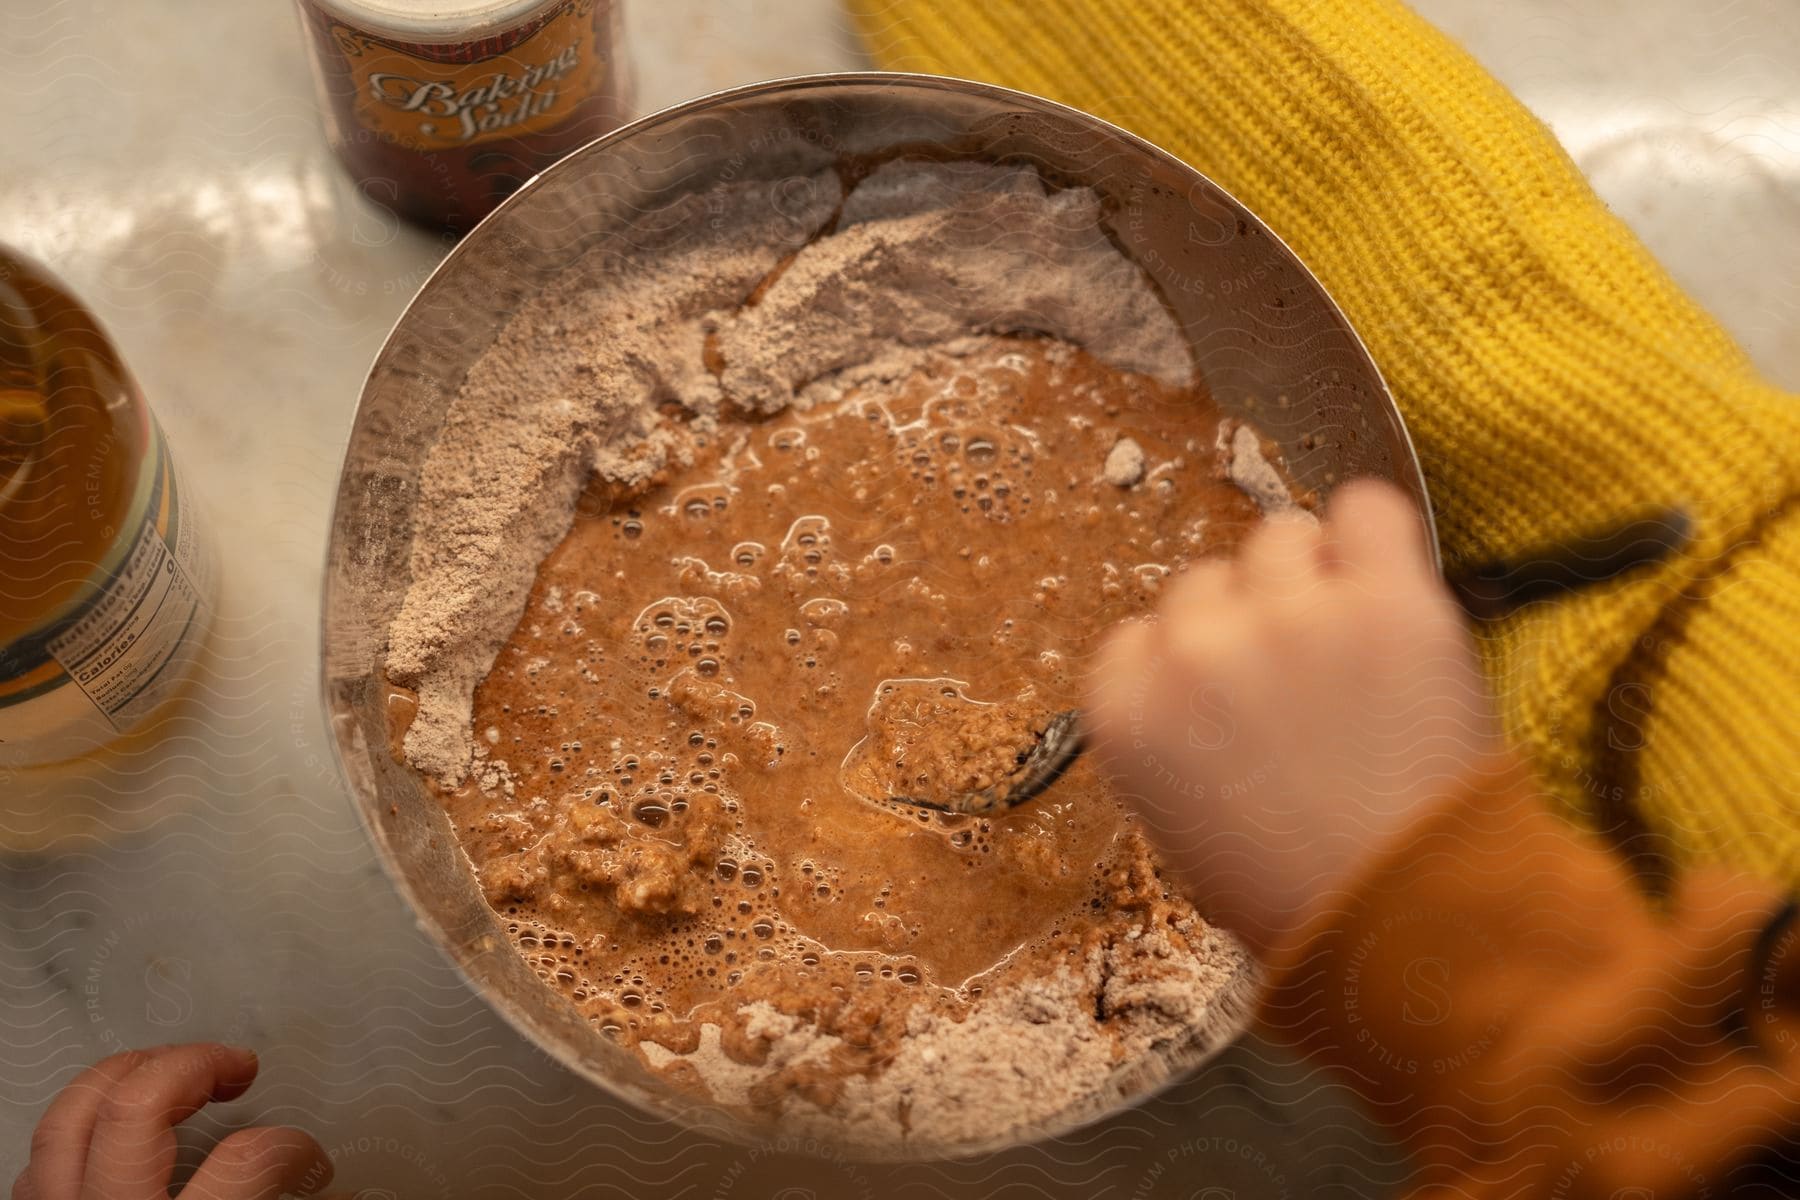 A person mixing ingredients in a bowl.